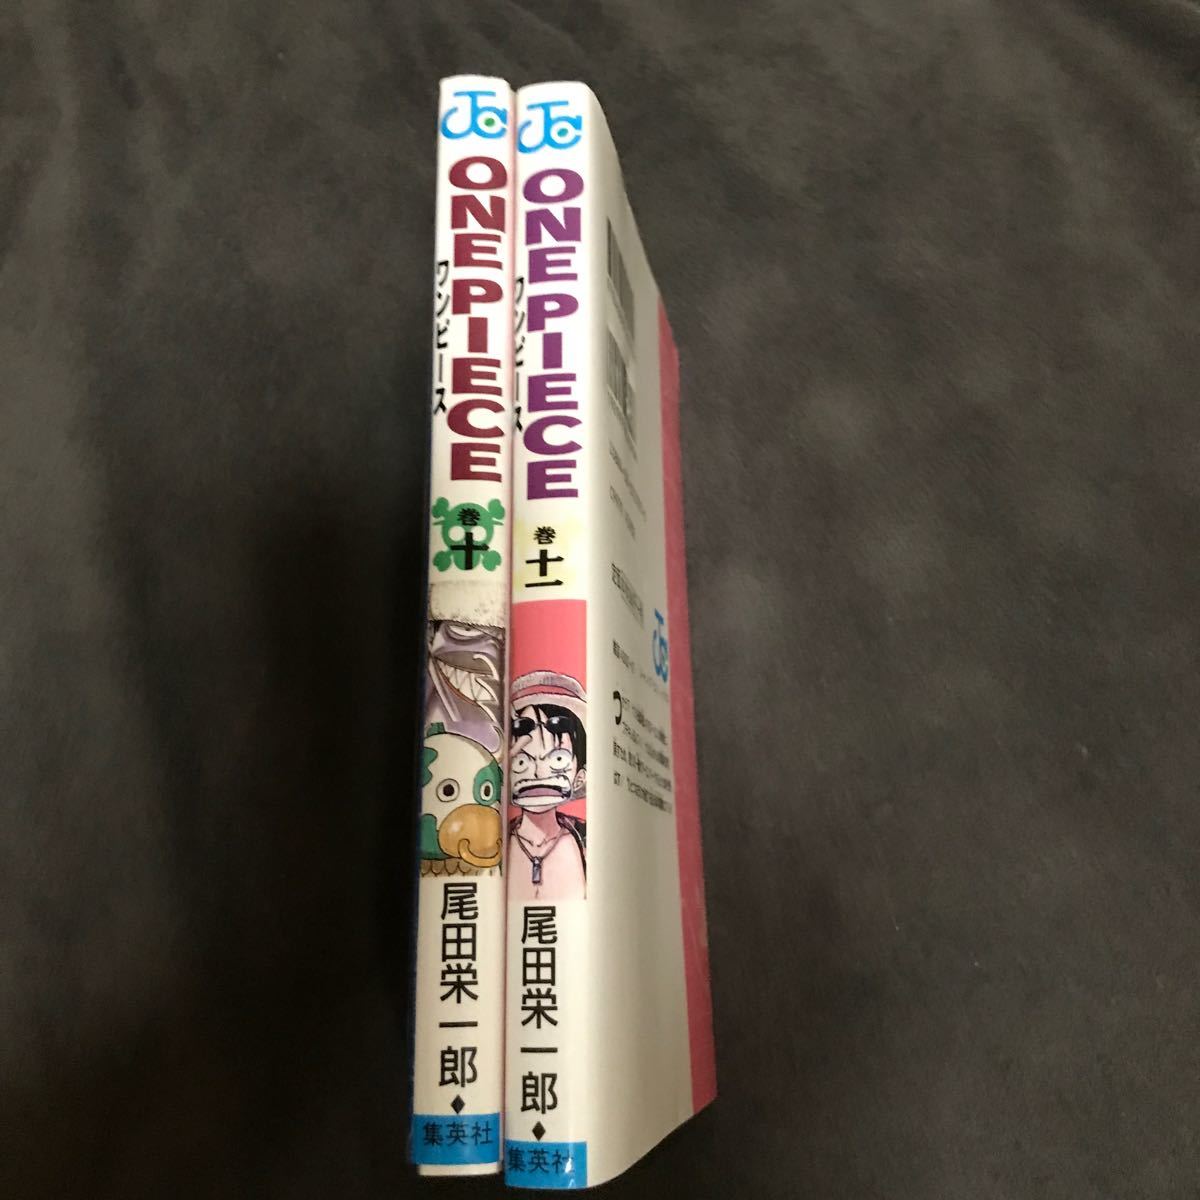 ONE PIECE 10巻.11巻！2冊セット販売！尾田栄一郎初版コミック漫画本